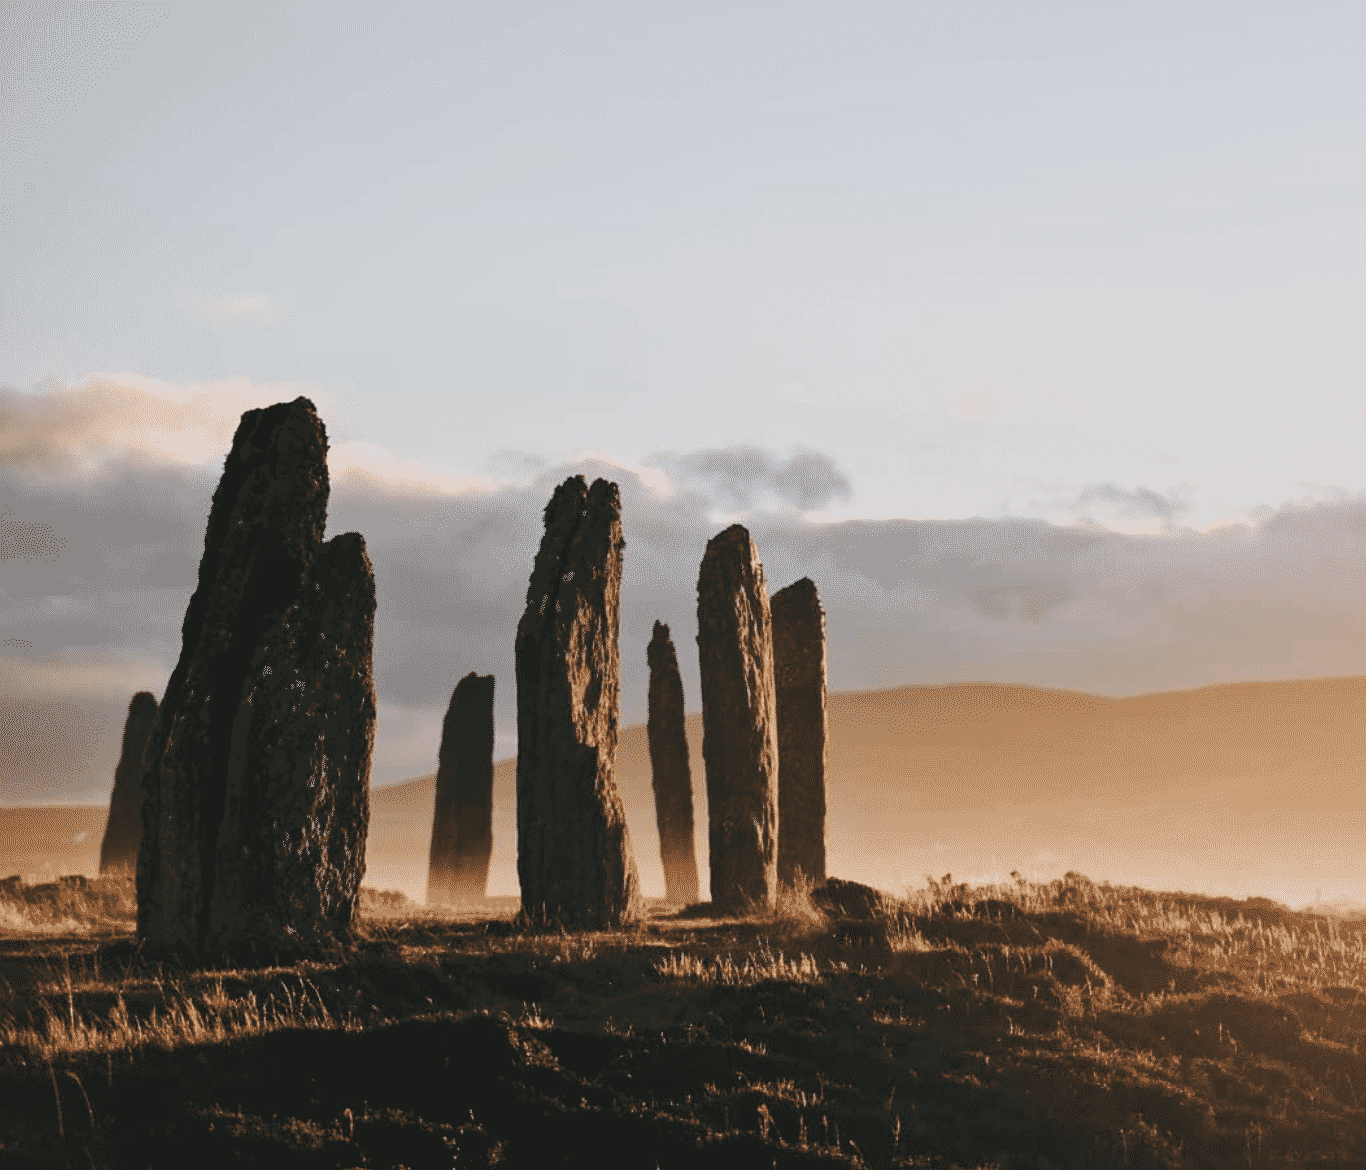 Megaliths Stone Age Architecture at Scotland